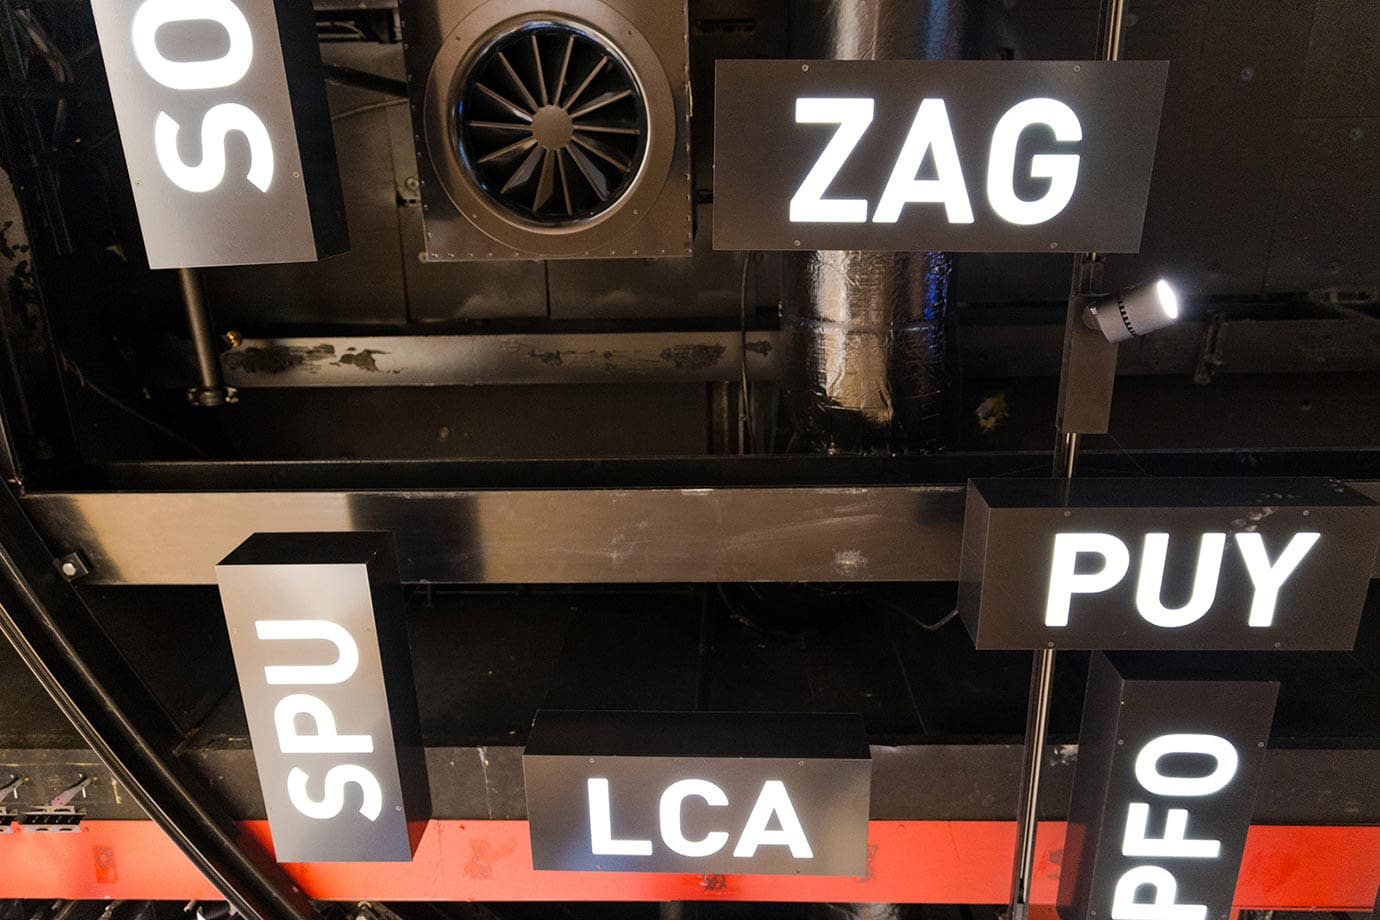 Airport codes at Schiphol Airport